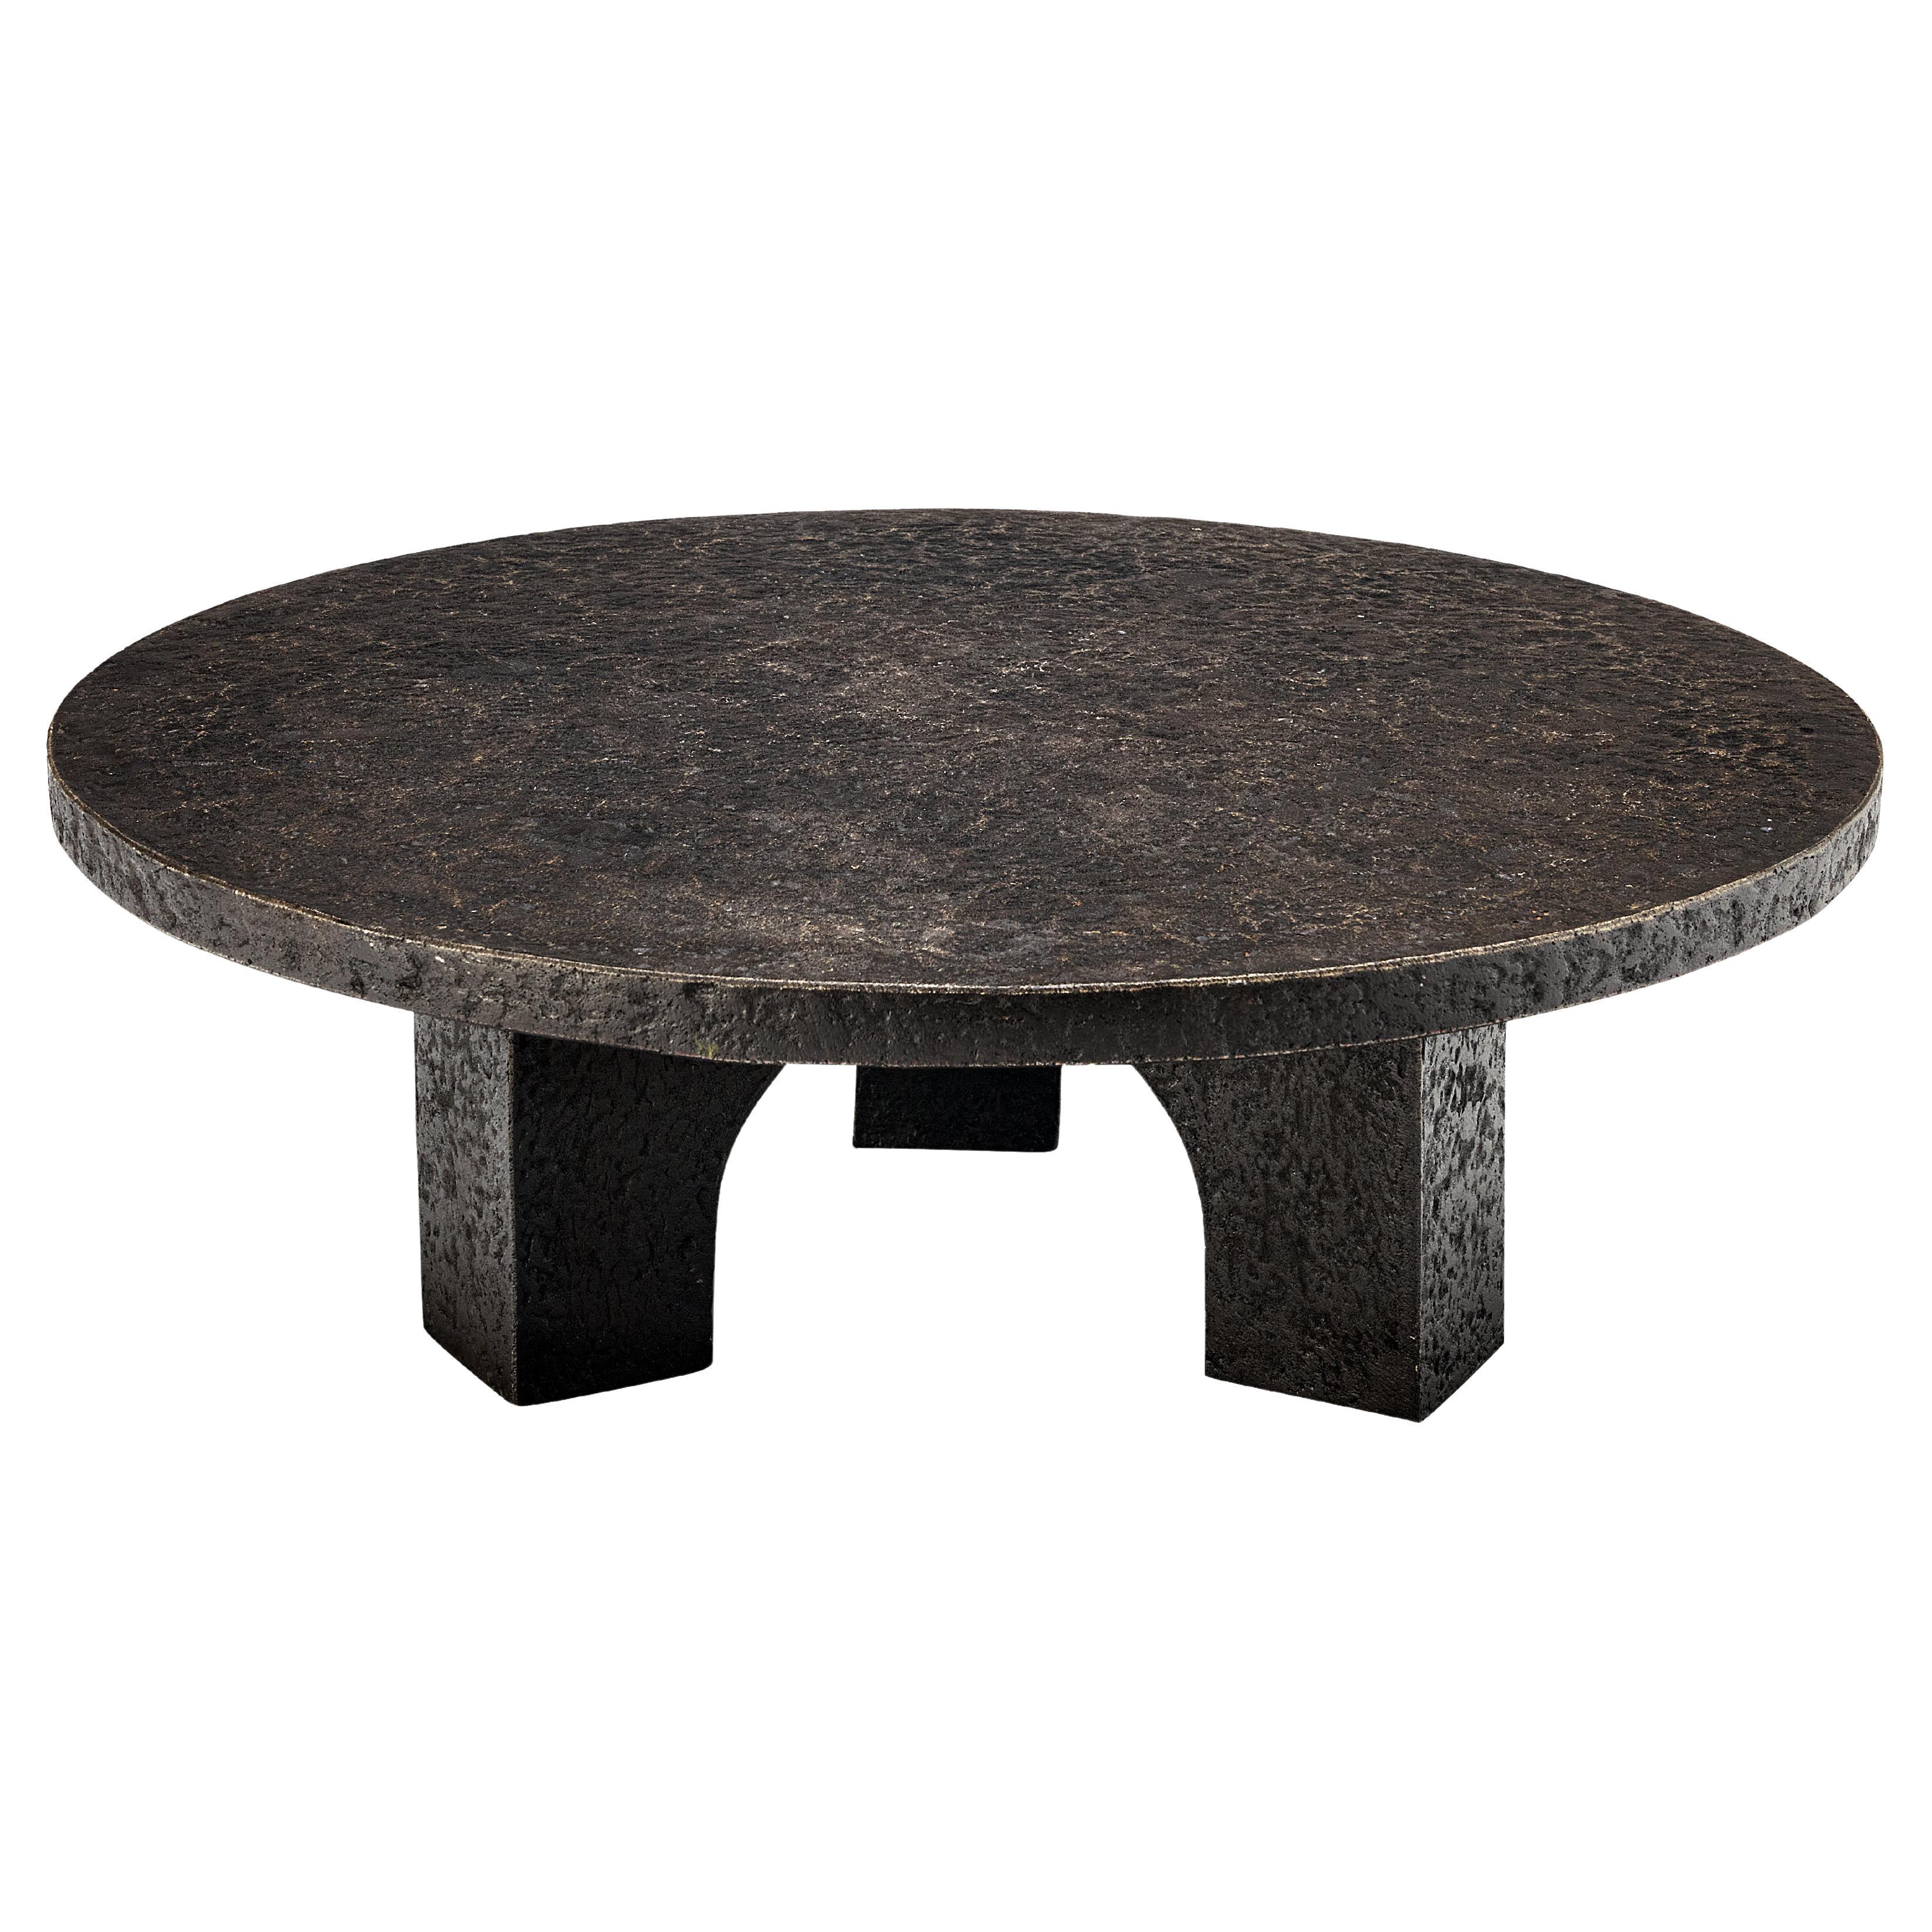 Round Brutalist Coffee Table with Stone Look